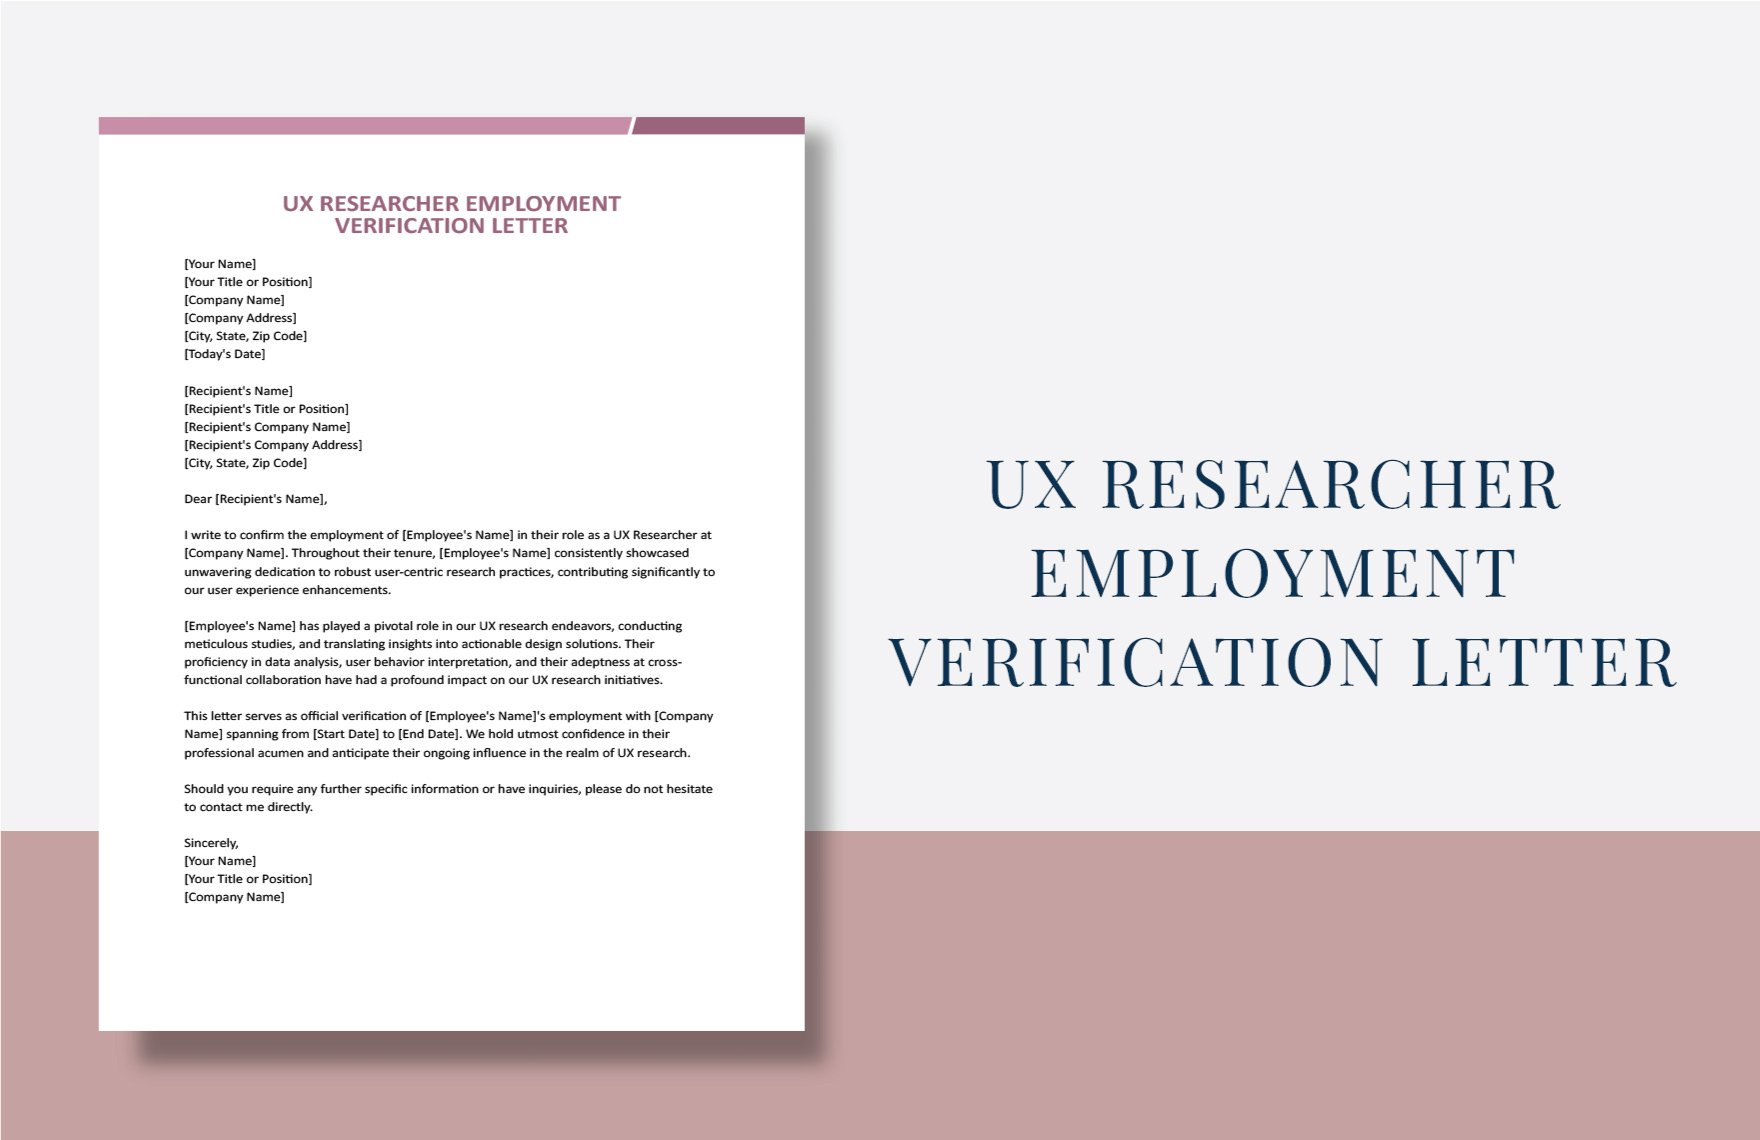 Free UX Researcher Employment Verification Letter in Word, Google Docs